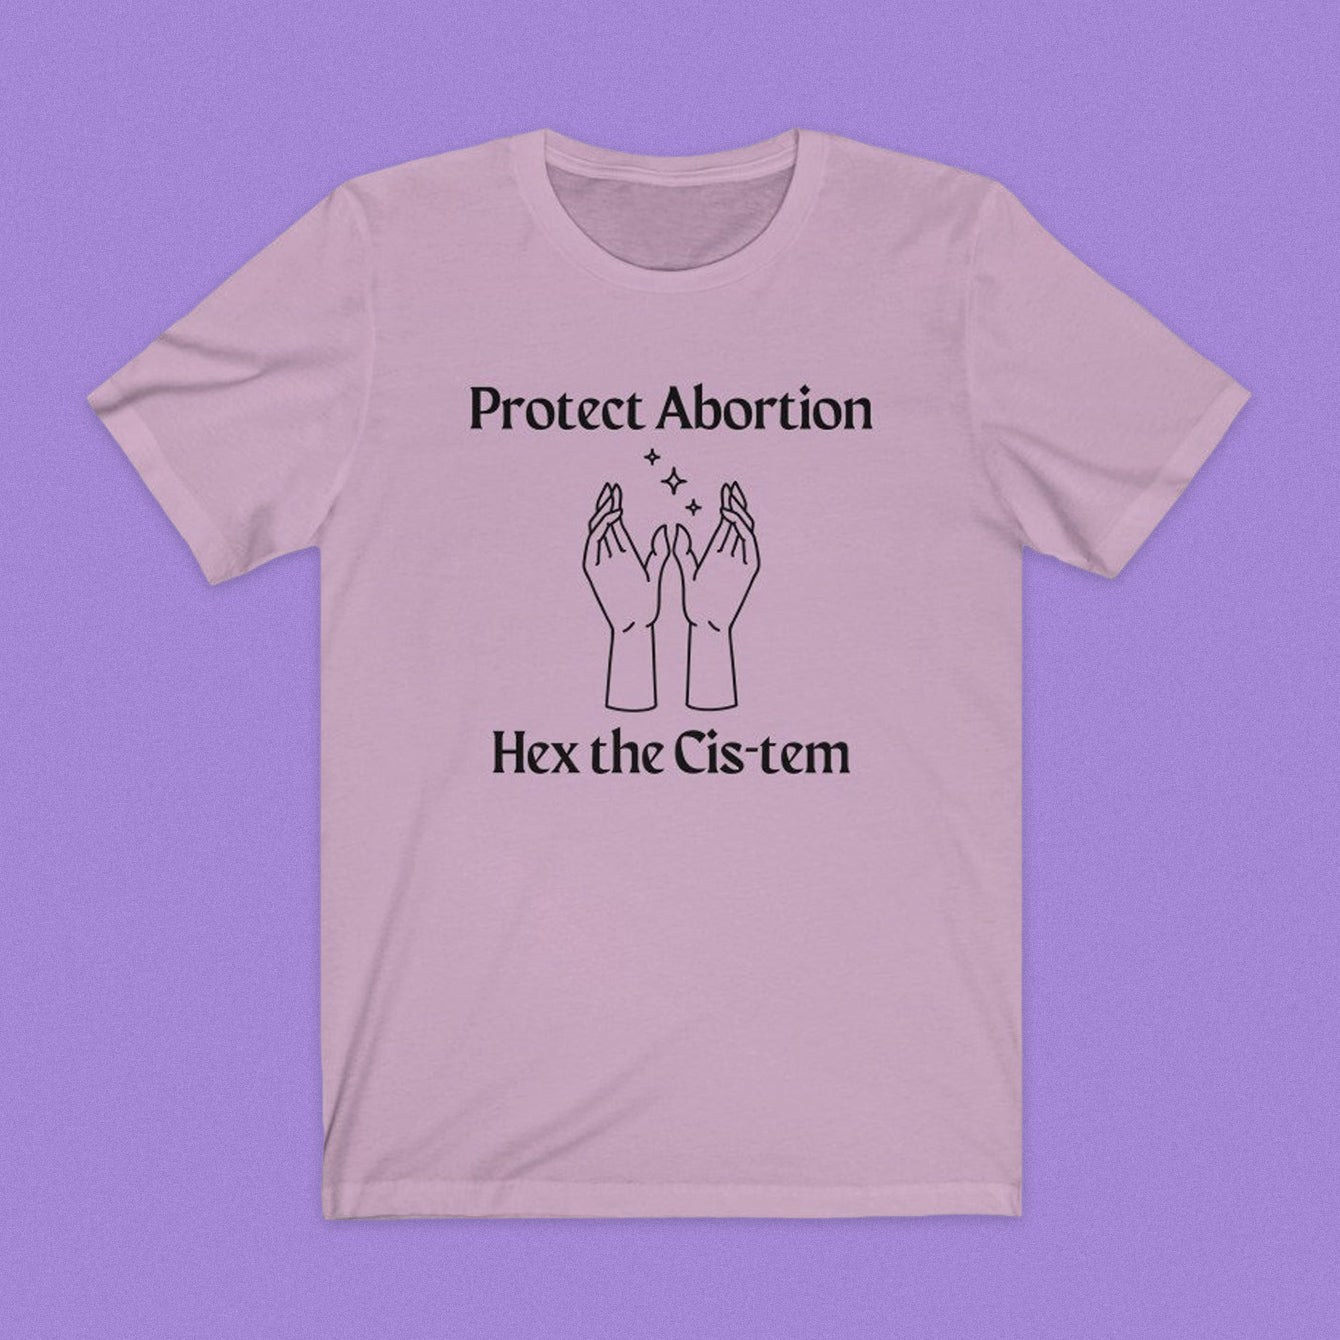 Reproductive Freedom Fund of New Hampshire: Hex the Cis-tem shirts